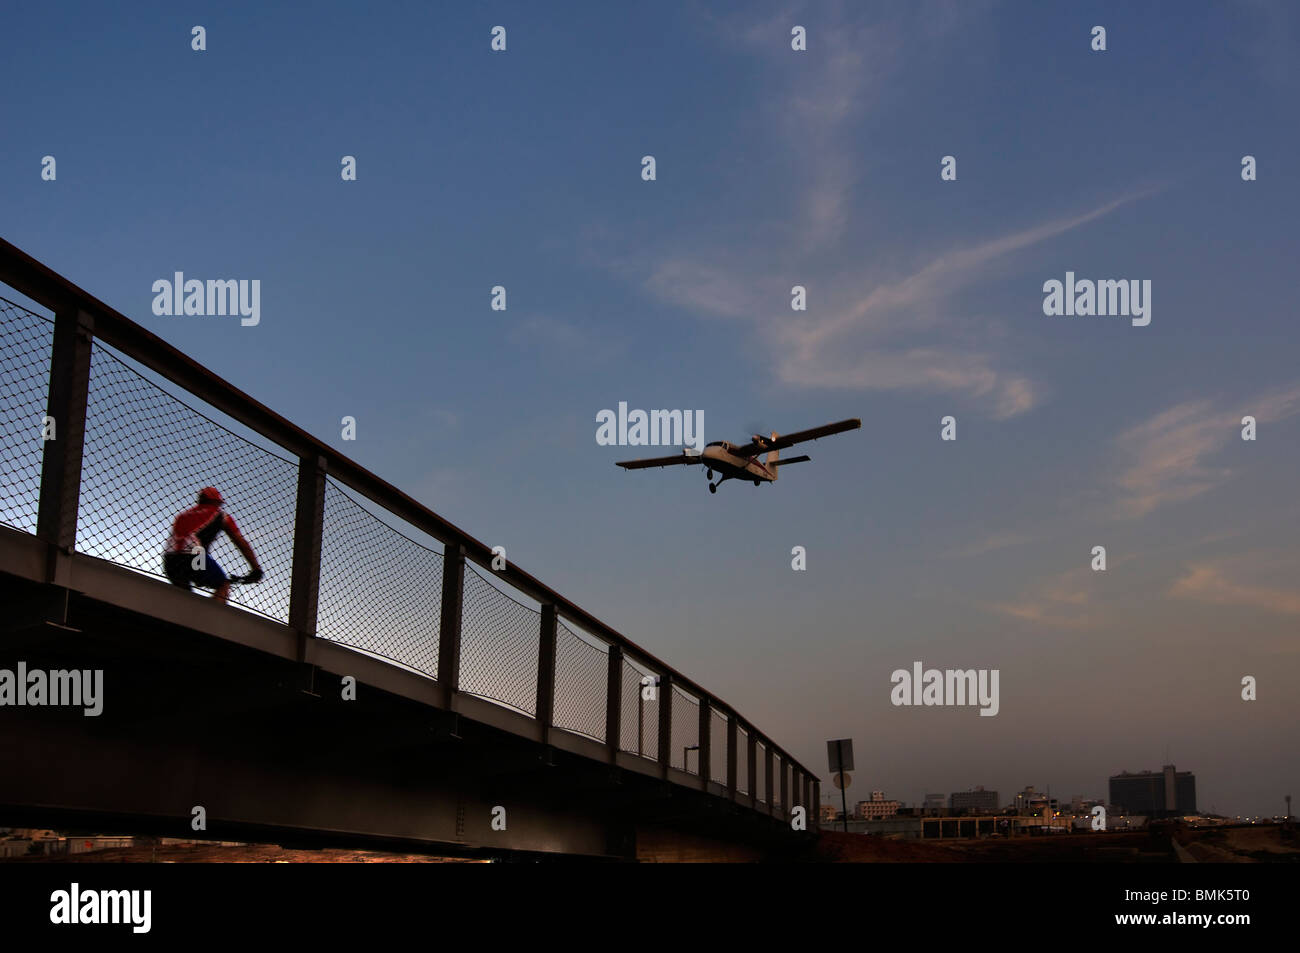 A small aircraft flying over a bicycler crossing a bridge over the Yarkon or Yarqon river in Tel Aviv Israel Stock Photo